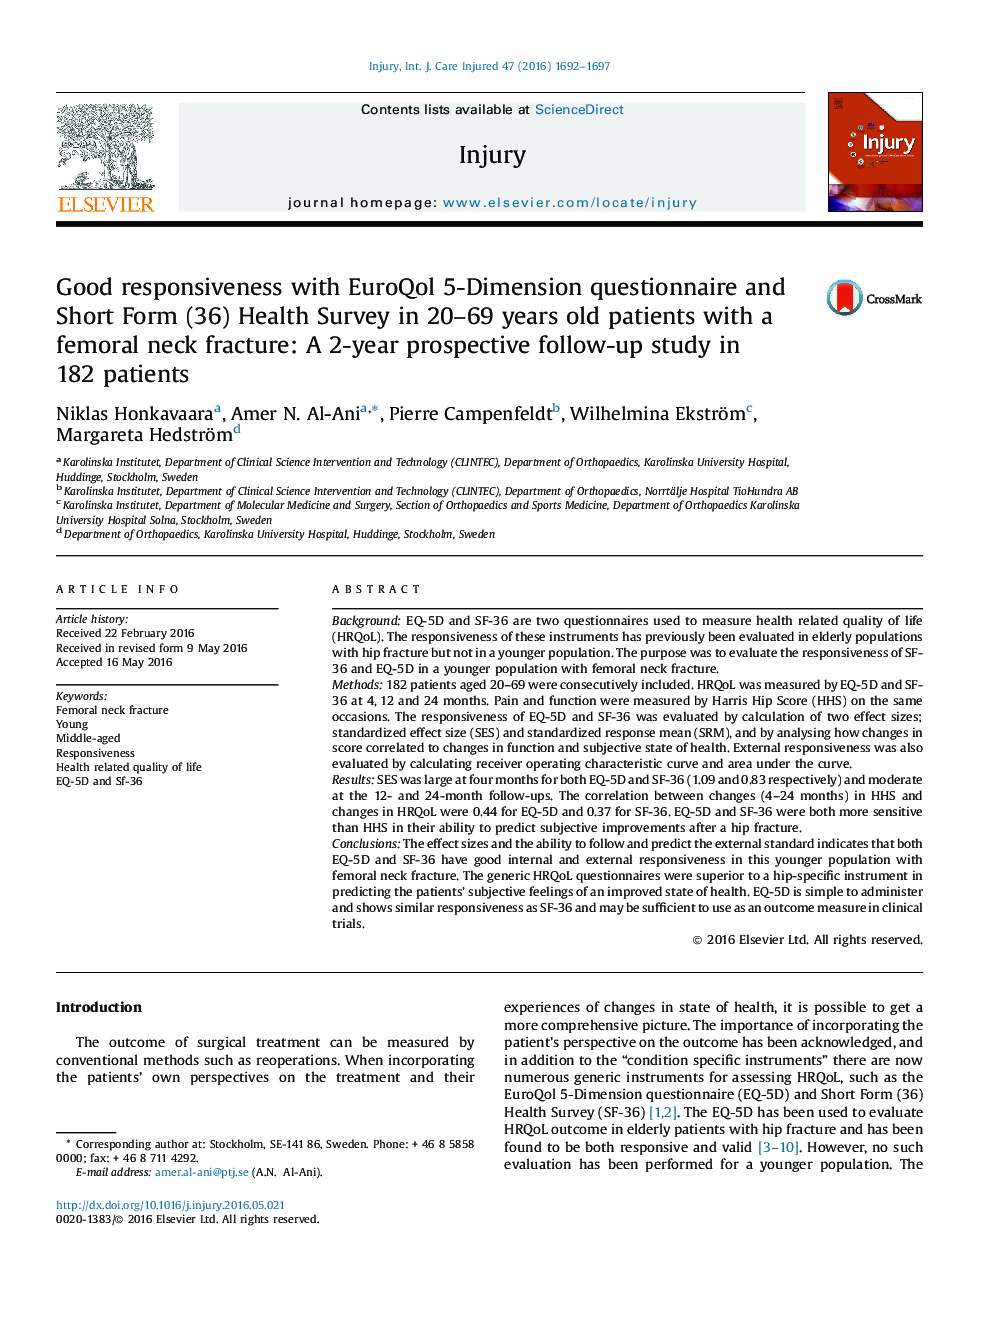 Good responsiveness with EuroQol 5-Dimension questionnaire and Short Form (36) Health Survey in 20-69 years old patients with a femoral neck fracture: A 2-year prospective follow-up study in 182 patients